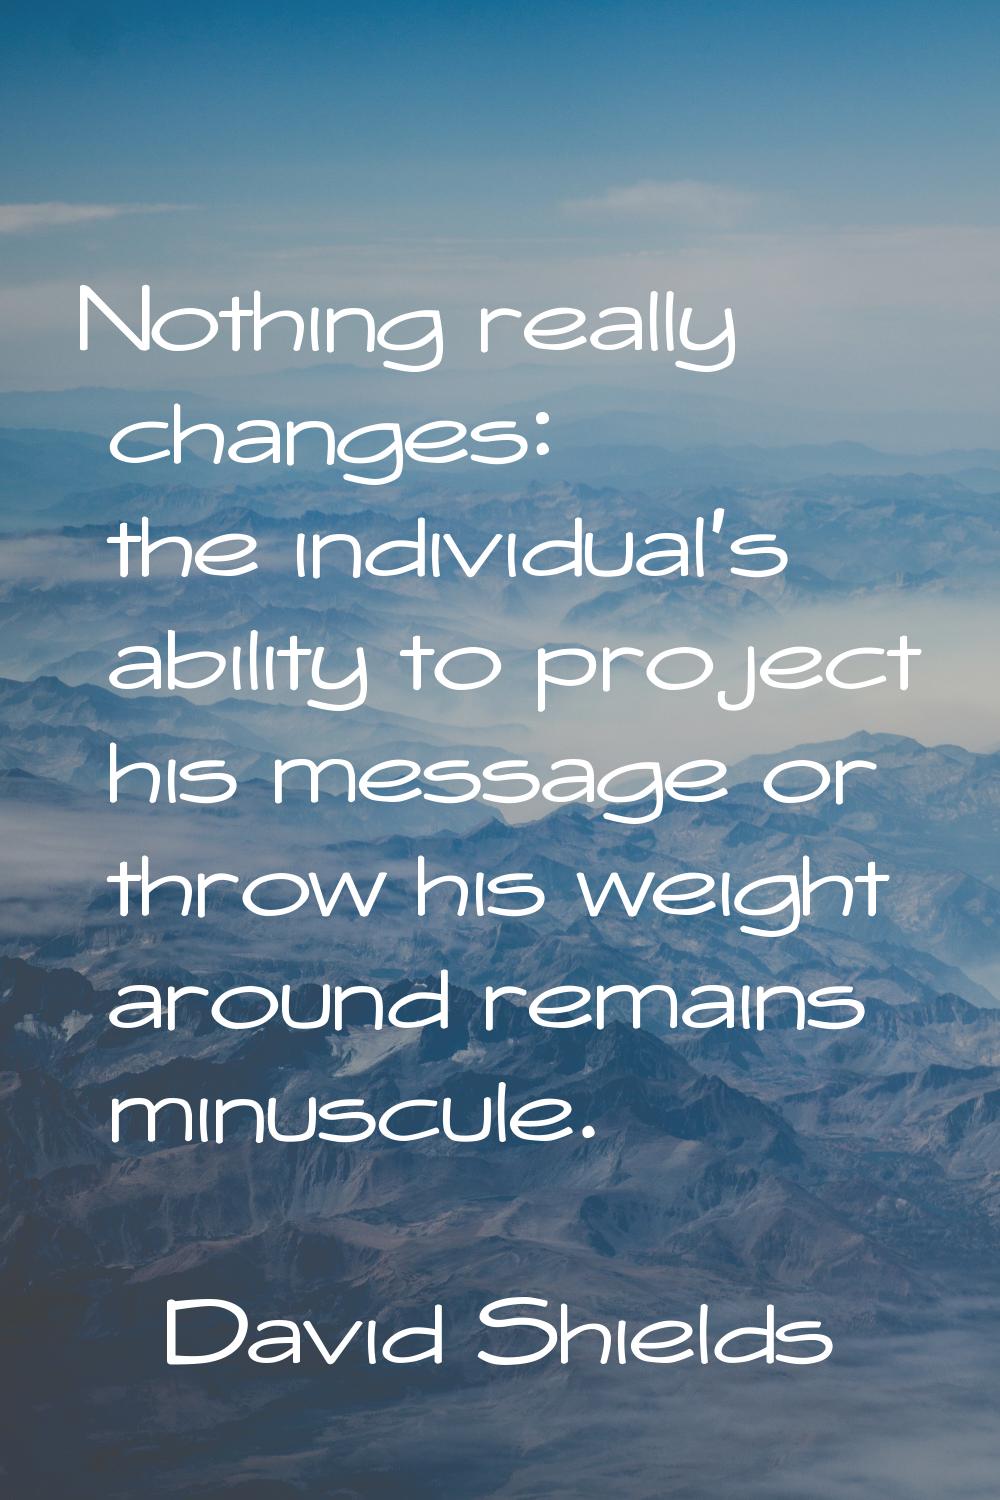 Nothing really changes: the individual's ability to project his message or throw his weight around 